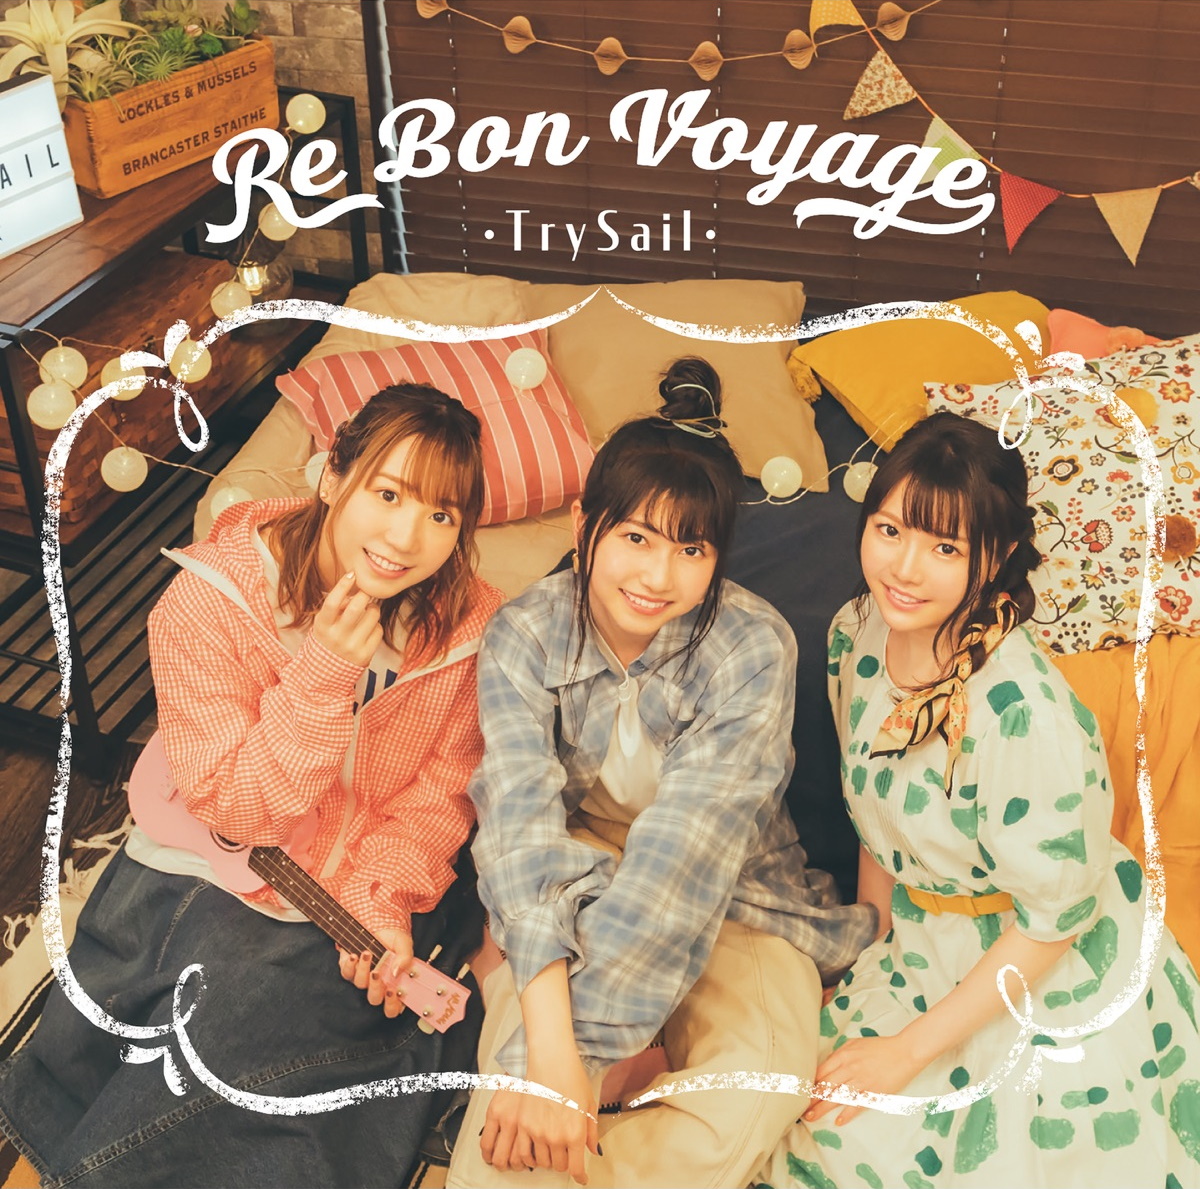 Cover for『TrySail - Kimi to Nara』from the release『Re Bon Voyage』